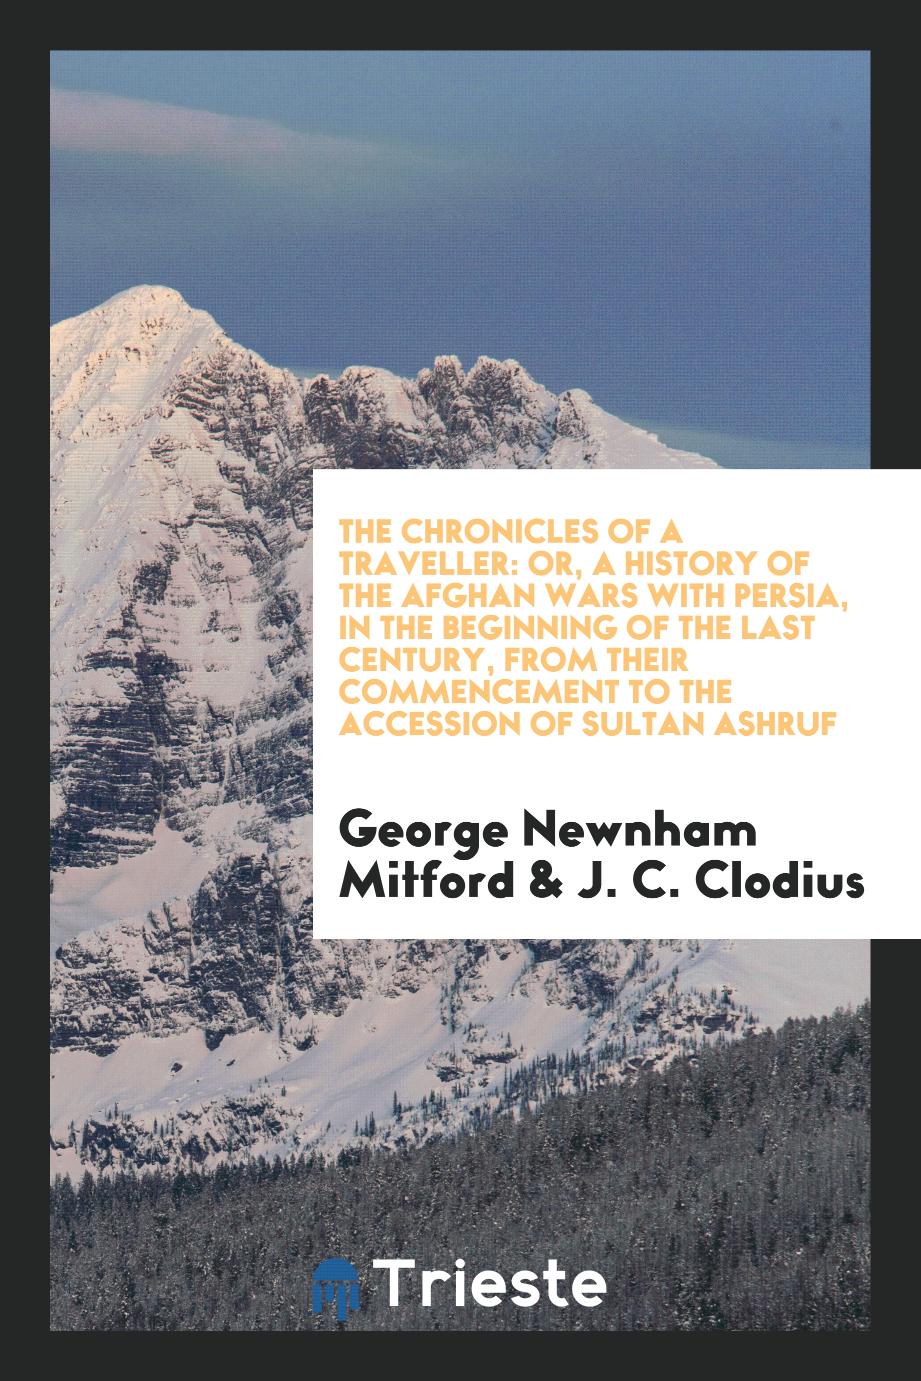 The chronicles of a traveller: or, a history of the Afghan wars with Persia, in the beginning of the last century, from their commencement to the accession of Sultan Ashruf